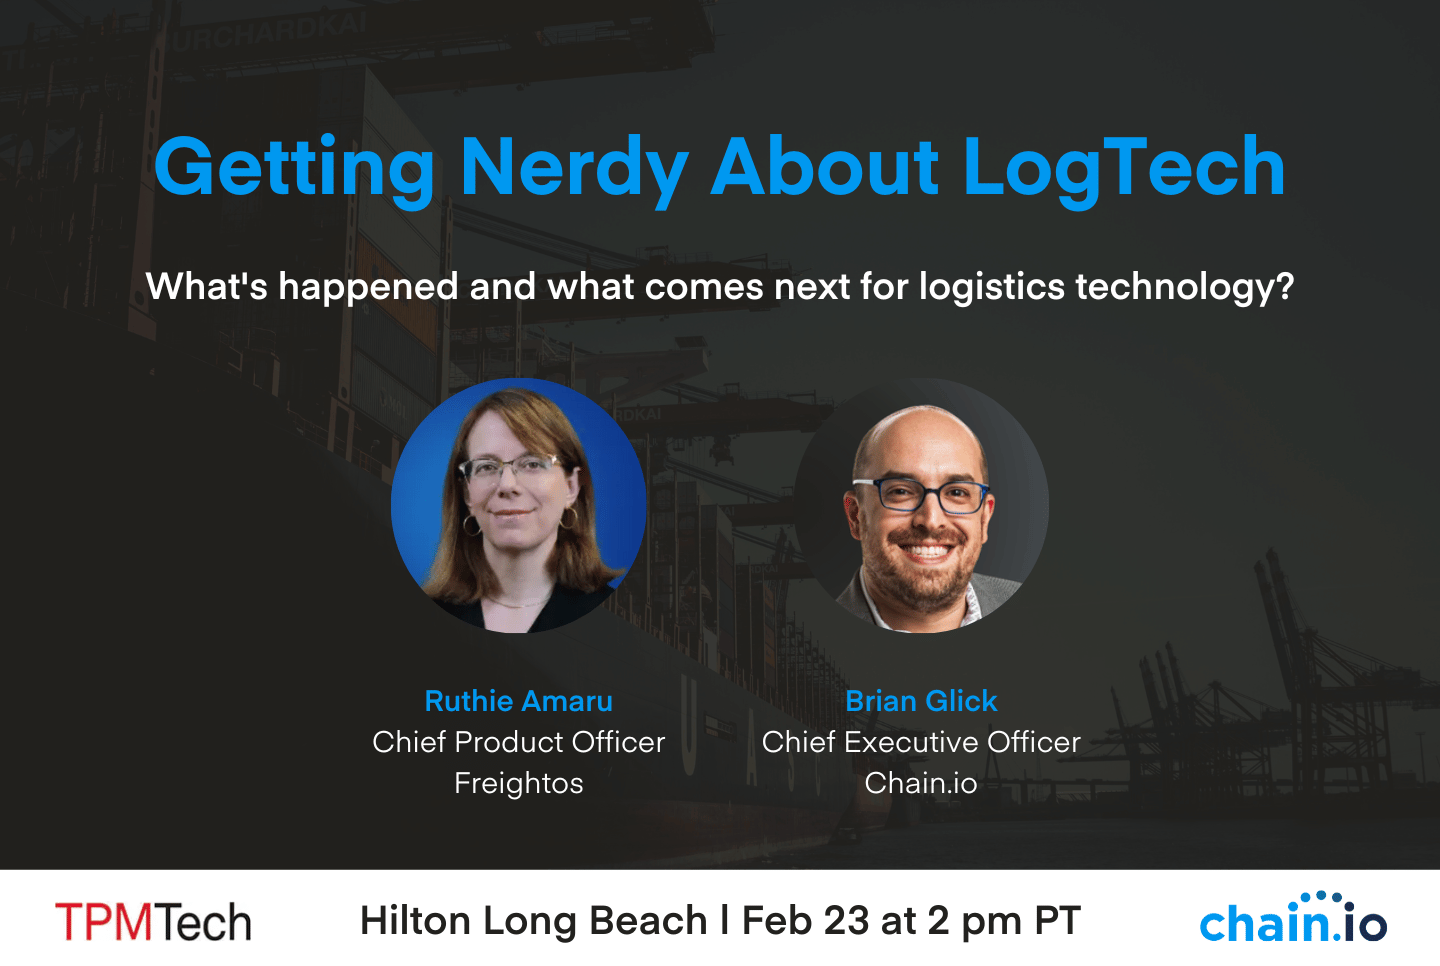 getting nerdy about logtech session with Ruthie Amaru and Brian Glick at TPMTech2023